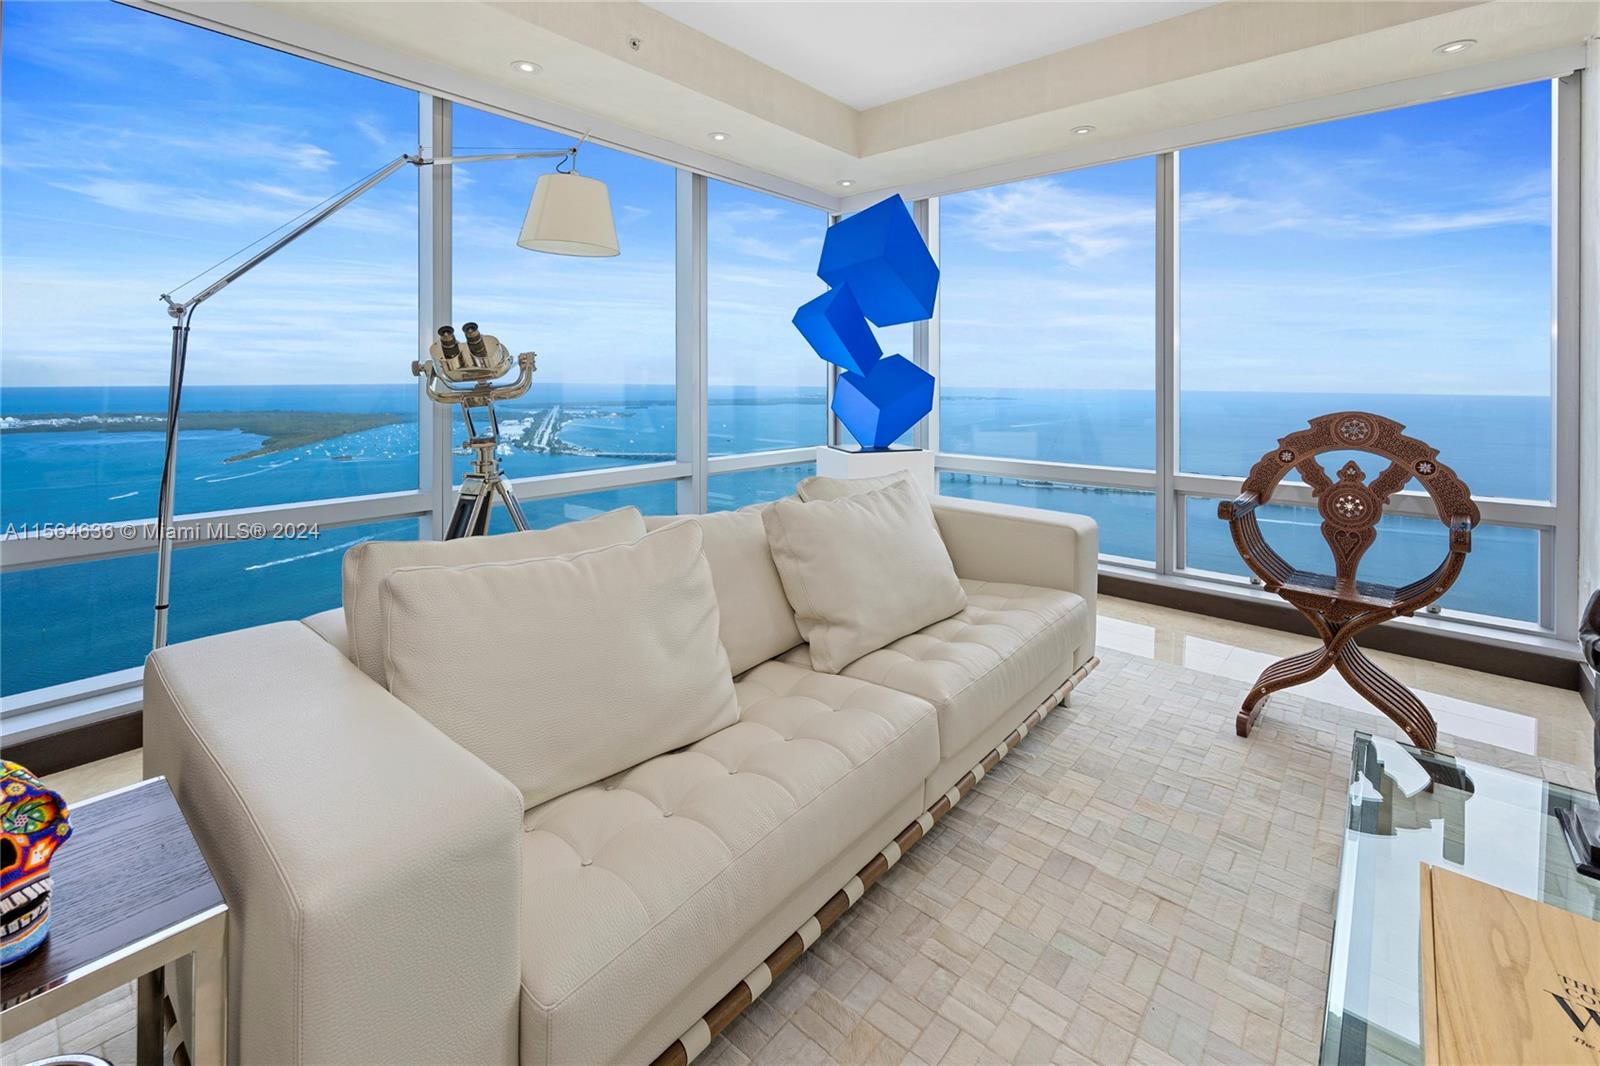 Experience the epitome of luxury living at this stunning home in the sky with breathtaking views of Brickell Bay.  Four (4) bedrooms, four (4)  full bathrooms and 1/2 with marble floors all throughout featuring a spacious open floorplan of two (2) units combined. Line F and A add up to over 5,000 square feet of living area. Many upgrades include a hammam in the master bathroom, Sonos Soundsystem, Romo wallpaper and Artefacto wall units.